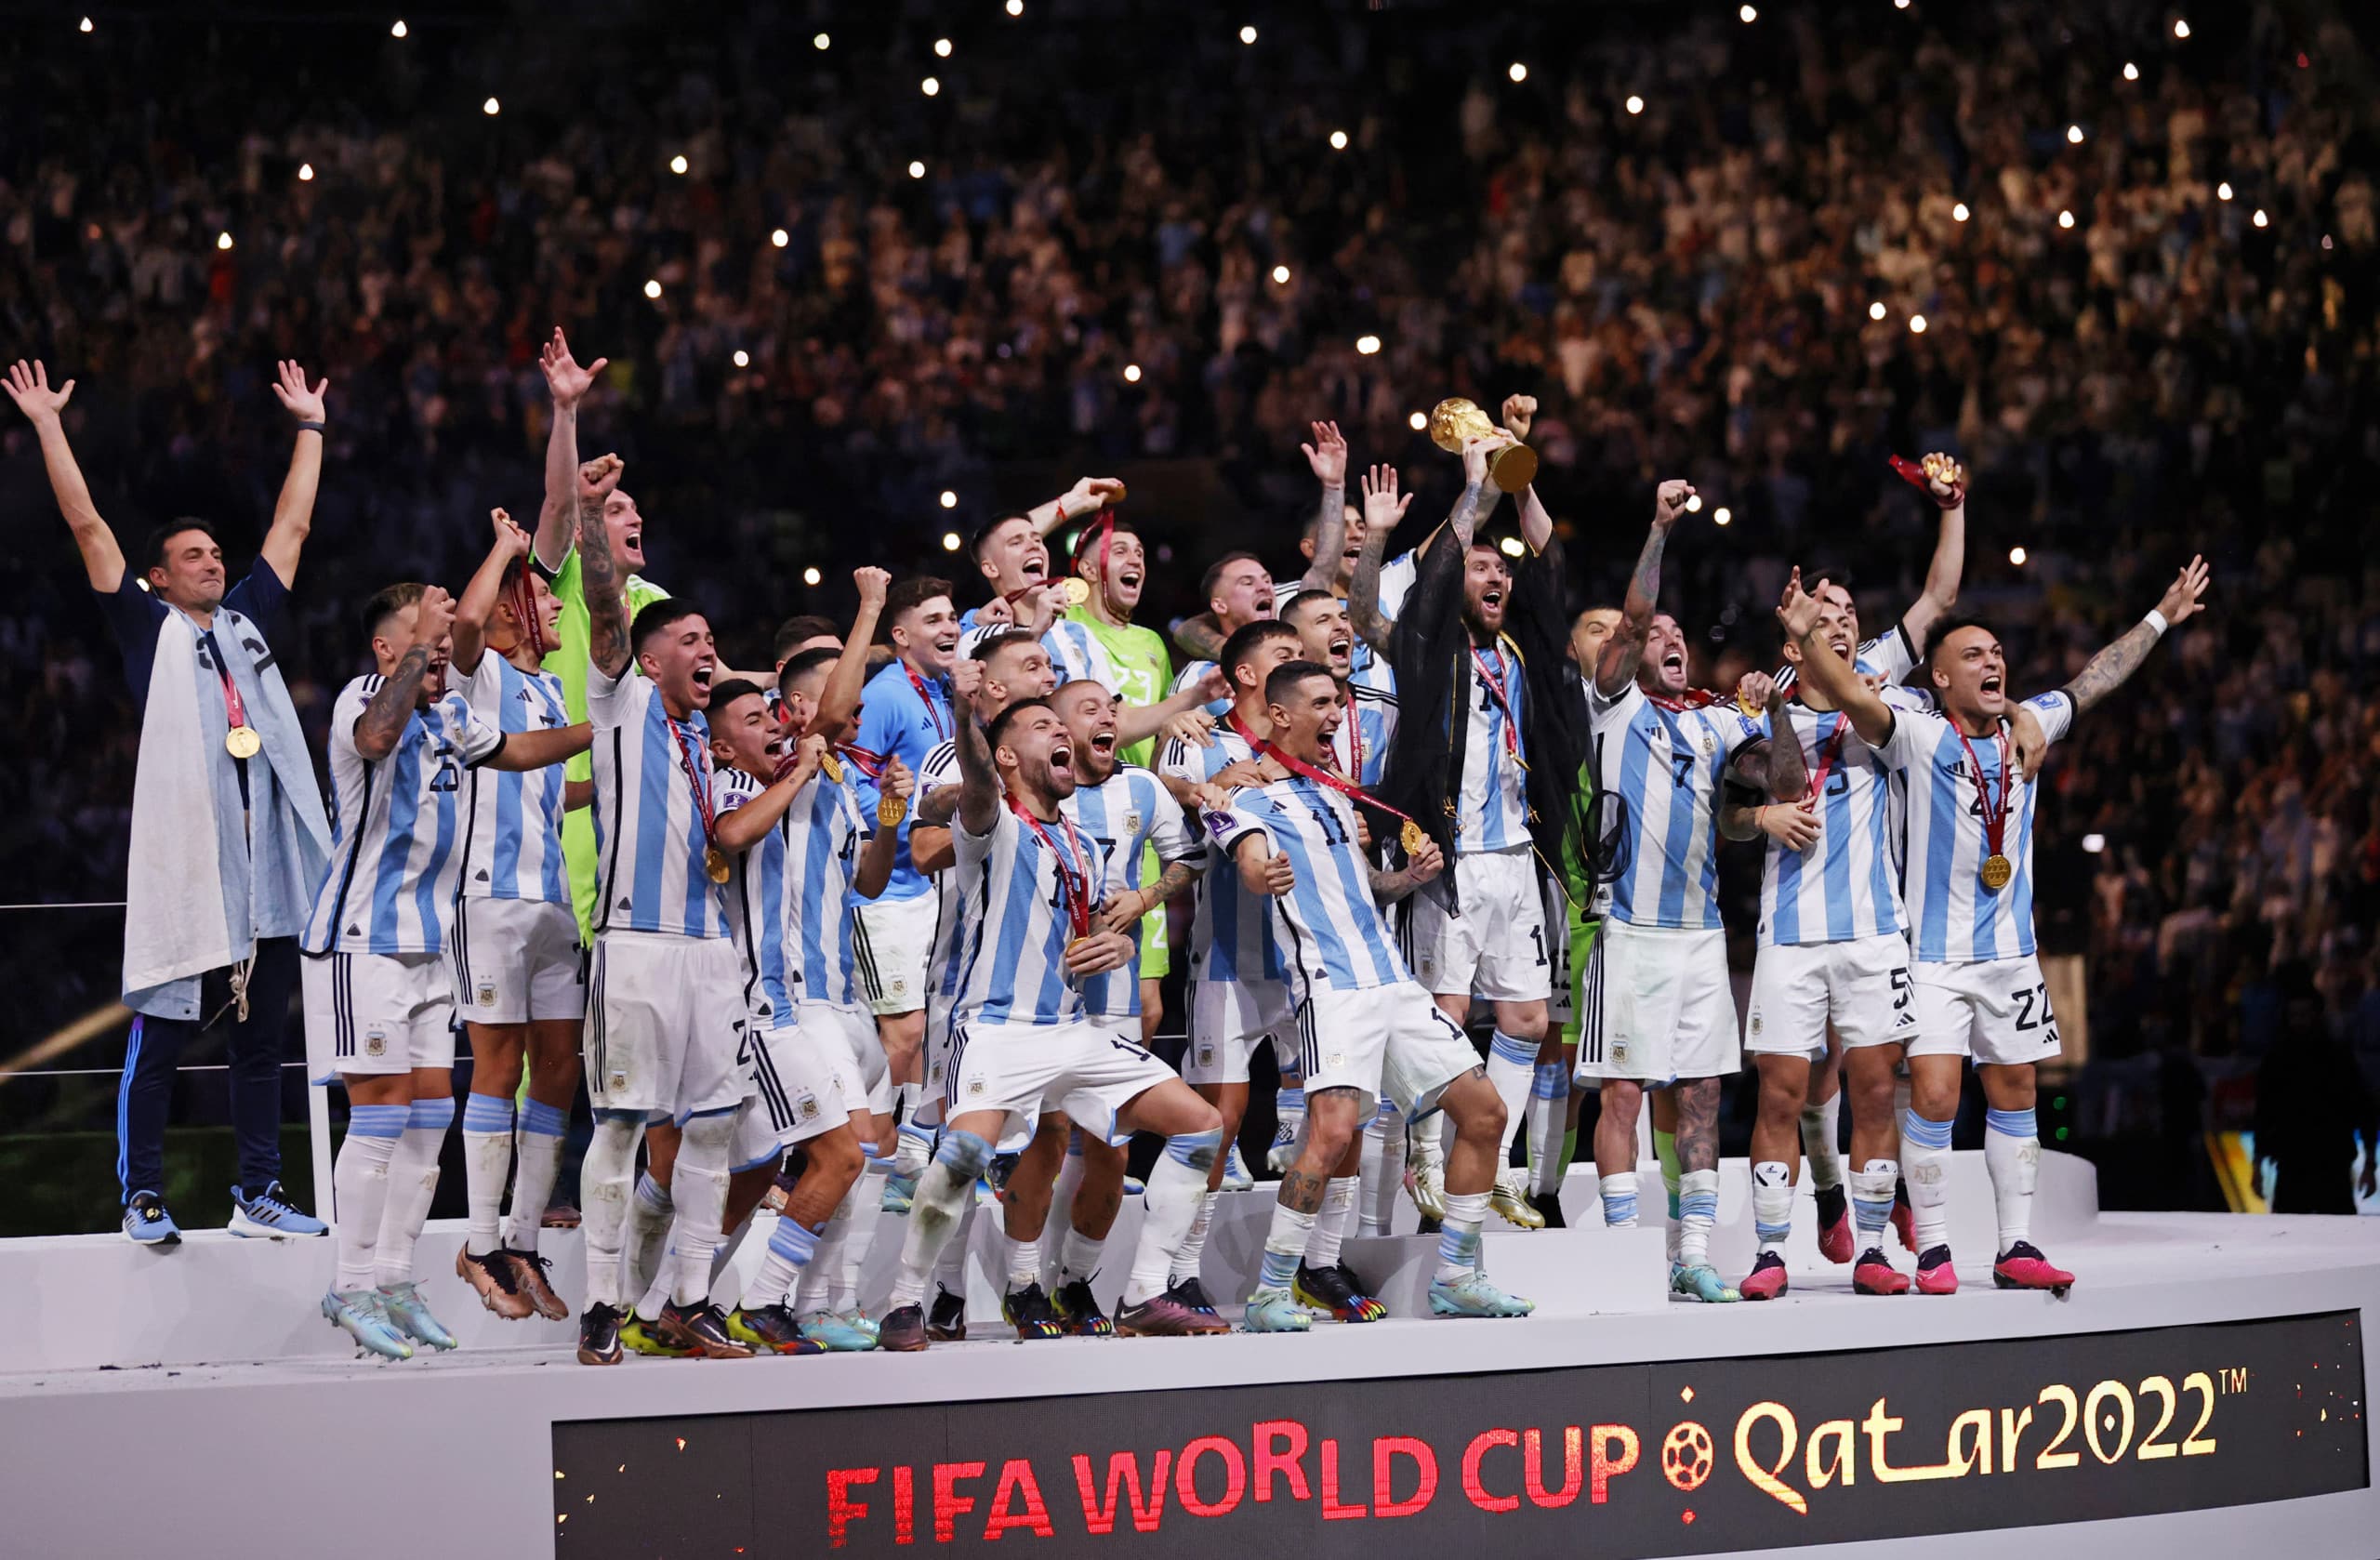 Lionel Messi and teammates lift World Cup trophy during post game ceremony